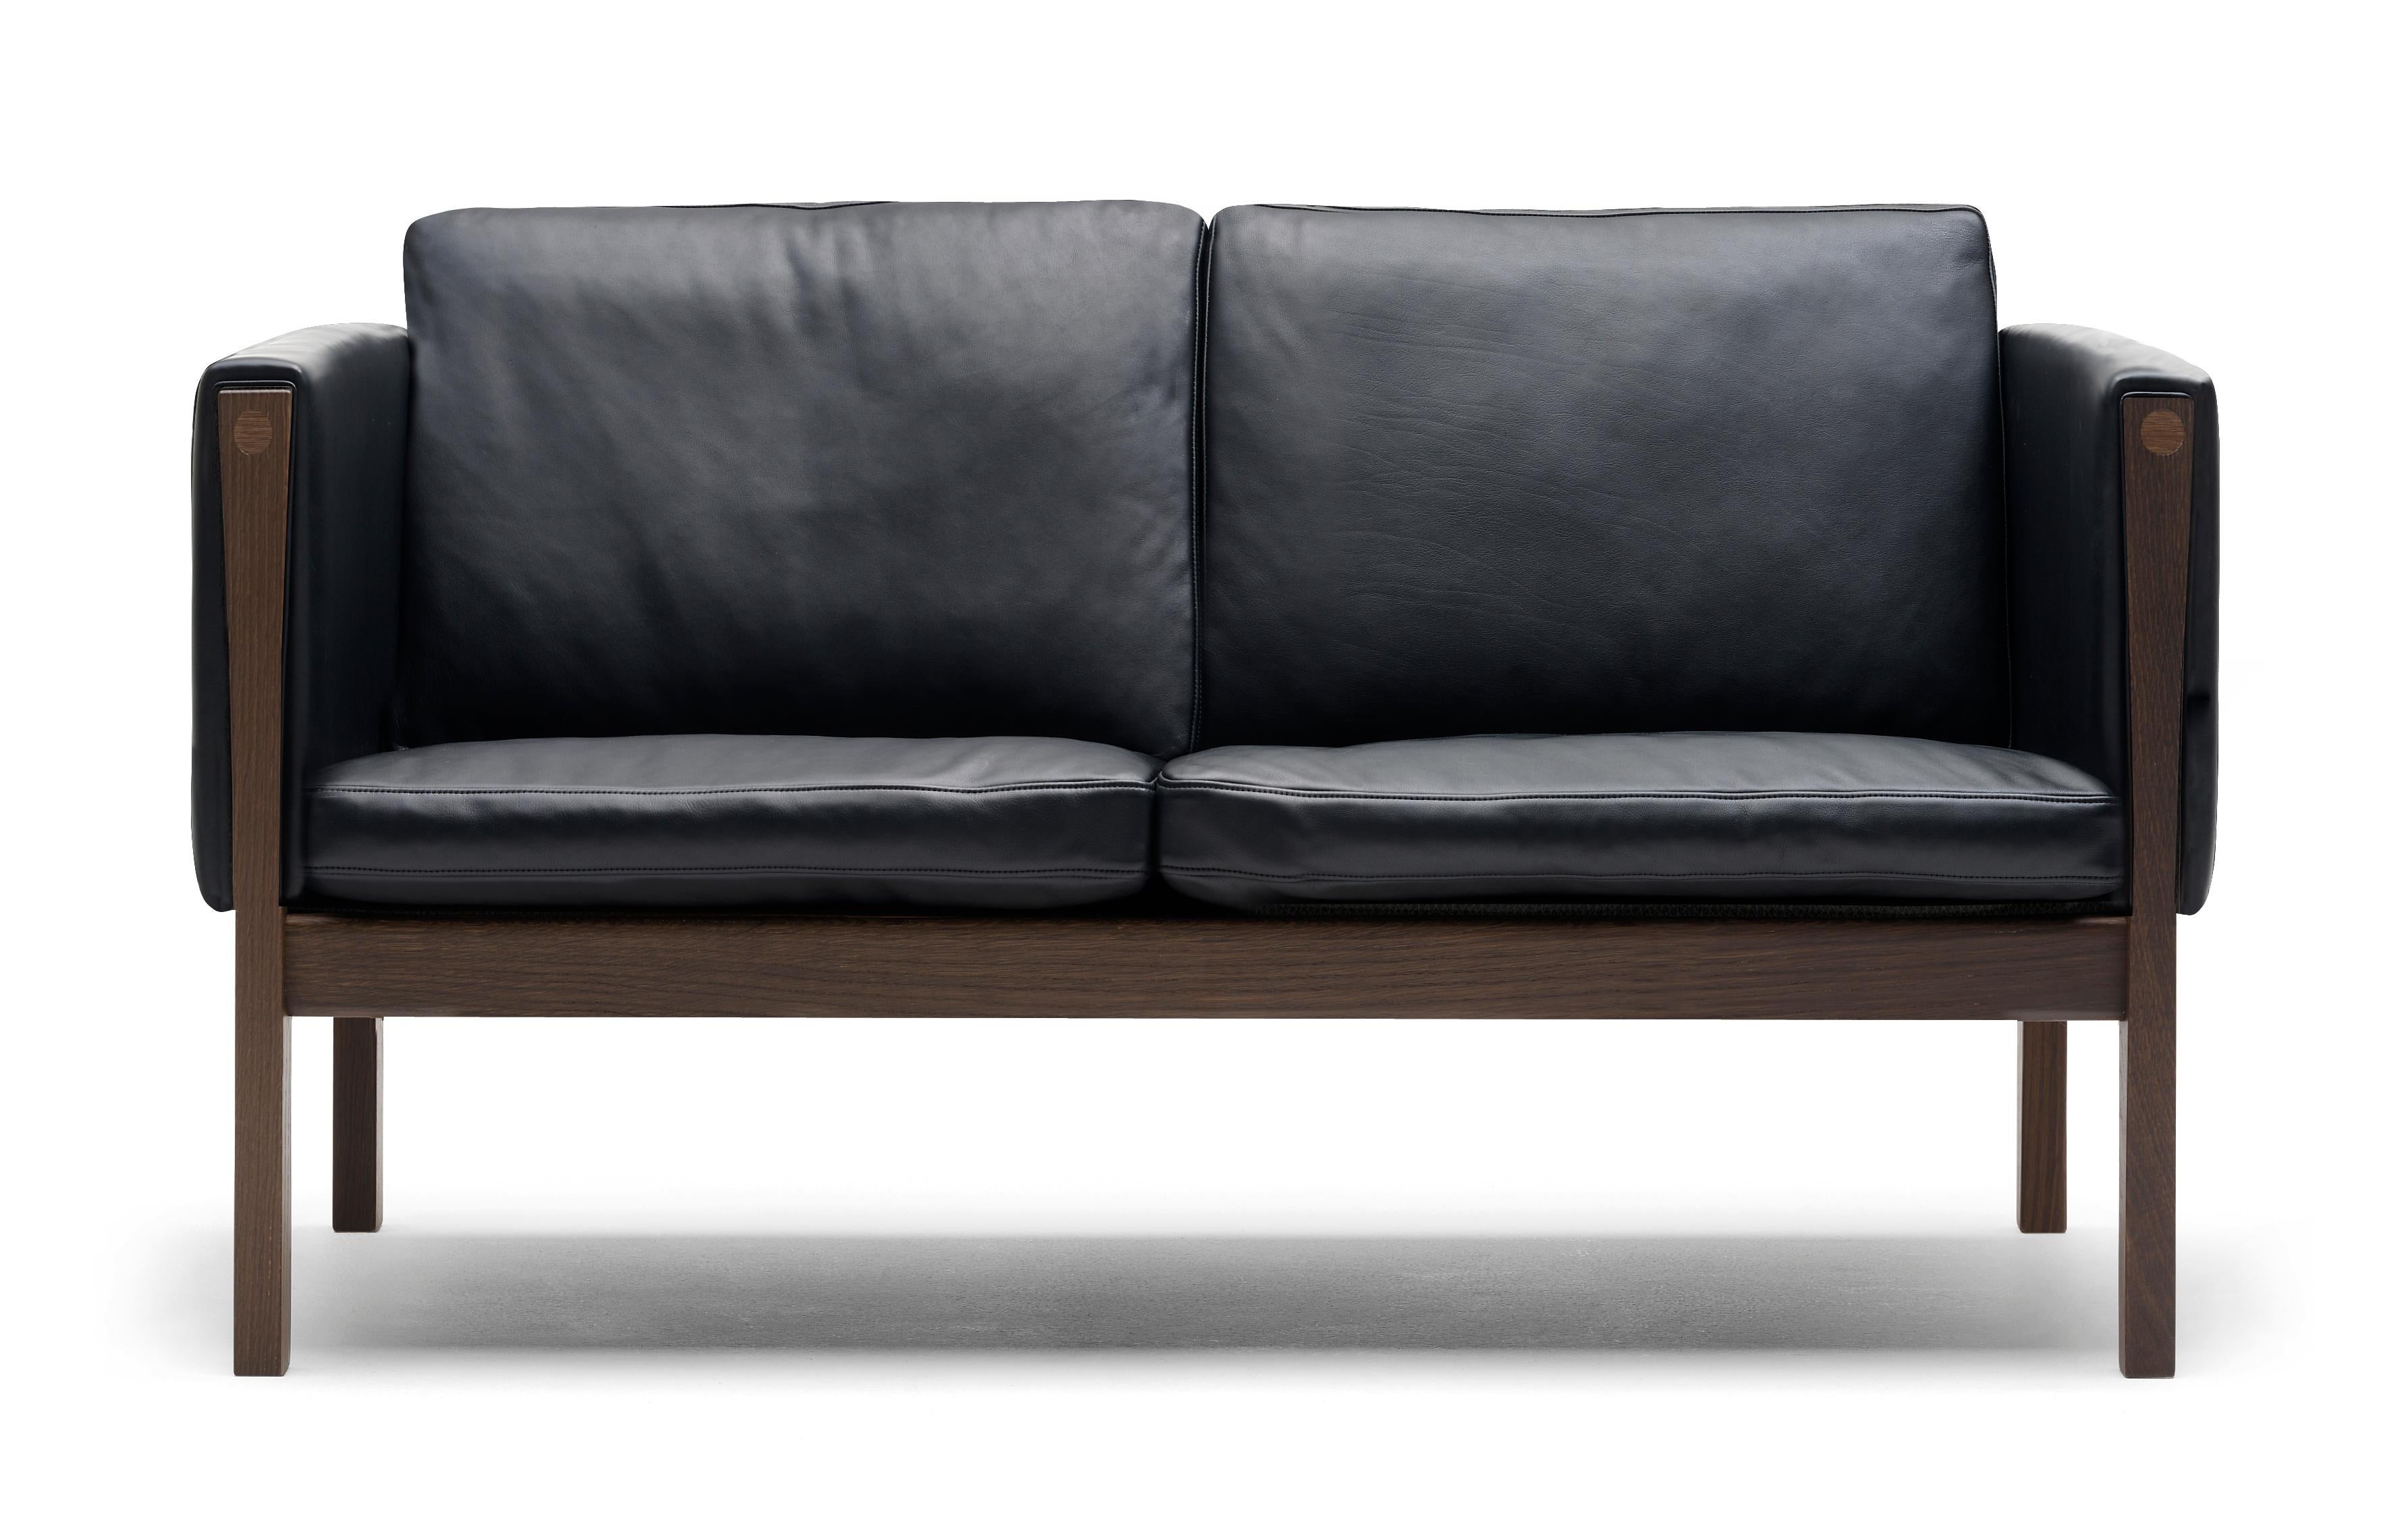 For Sale: Black (Sif 98) CH162 Sofa in Walnut Oil Frame with Leather Upholstery by Hans J. Wegner